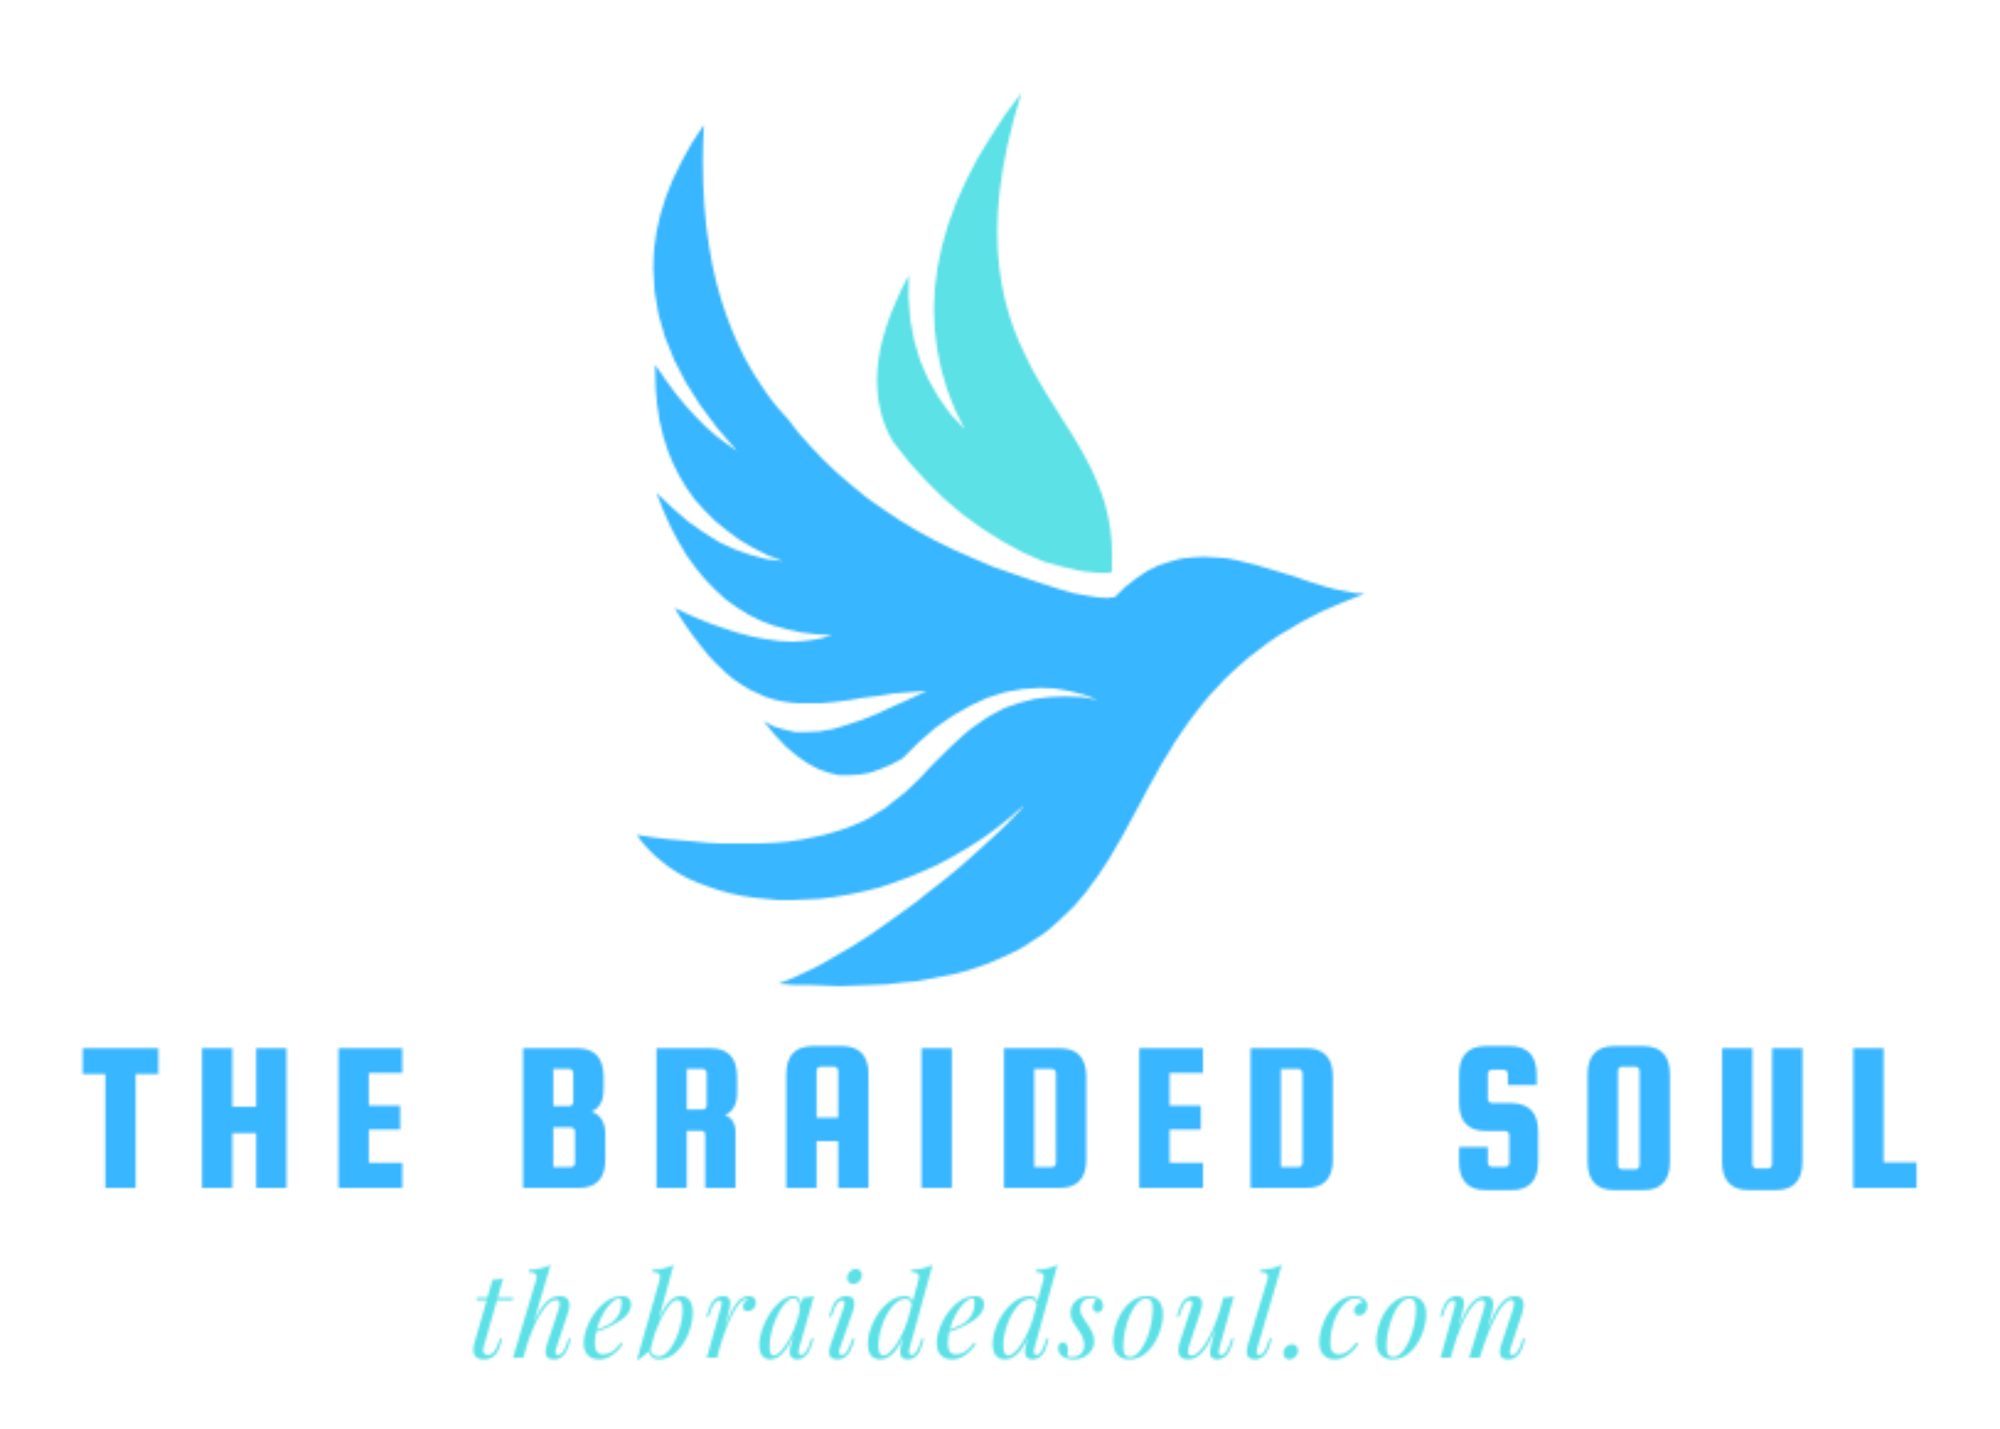 The Braided Soul